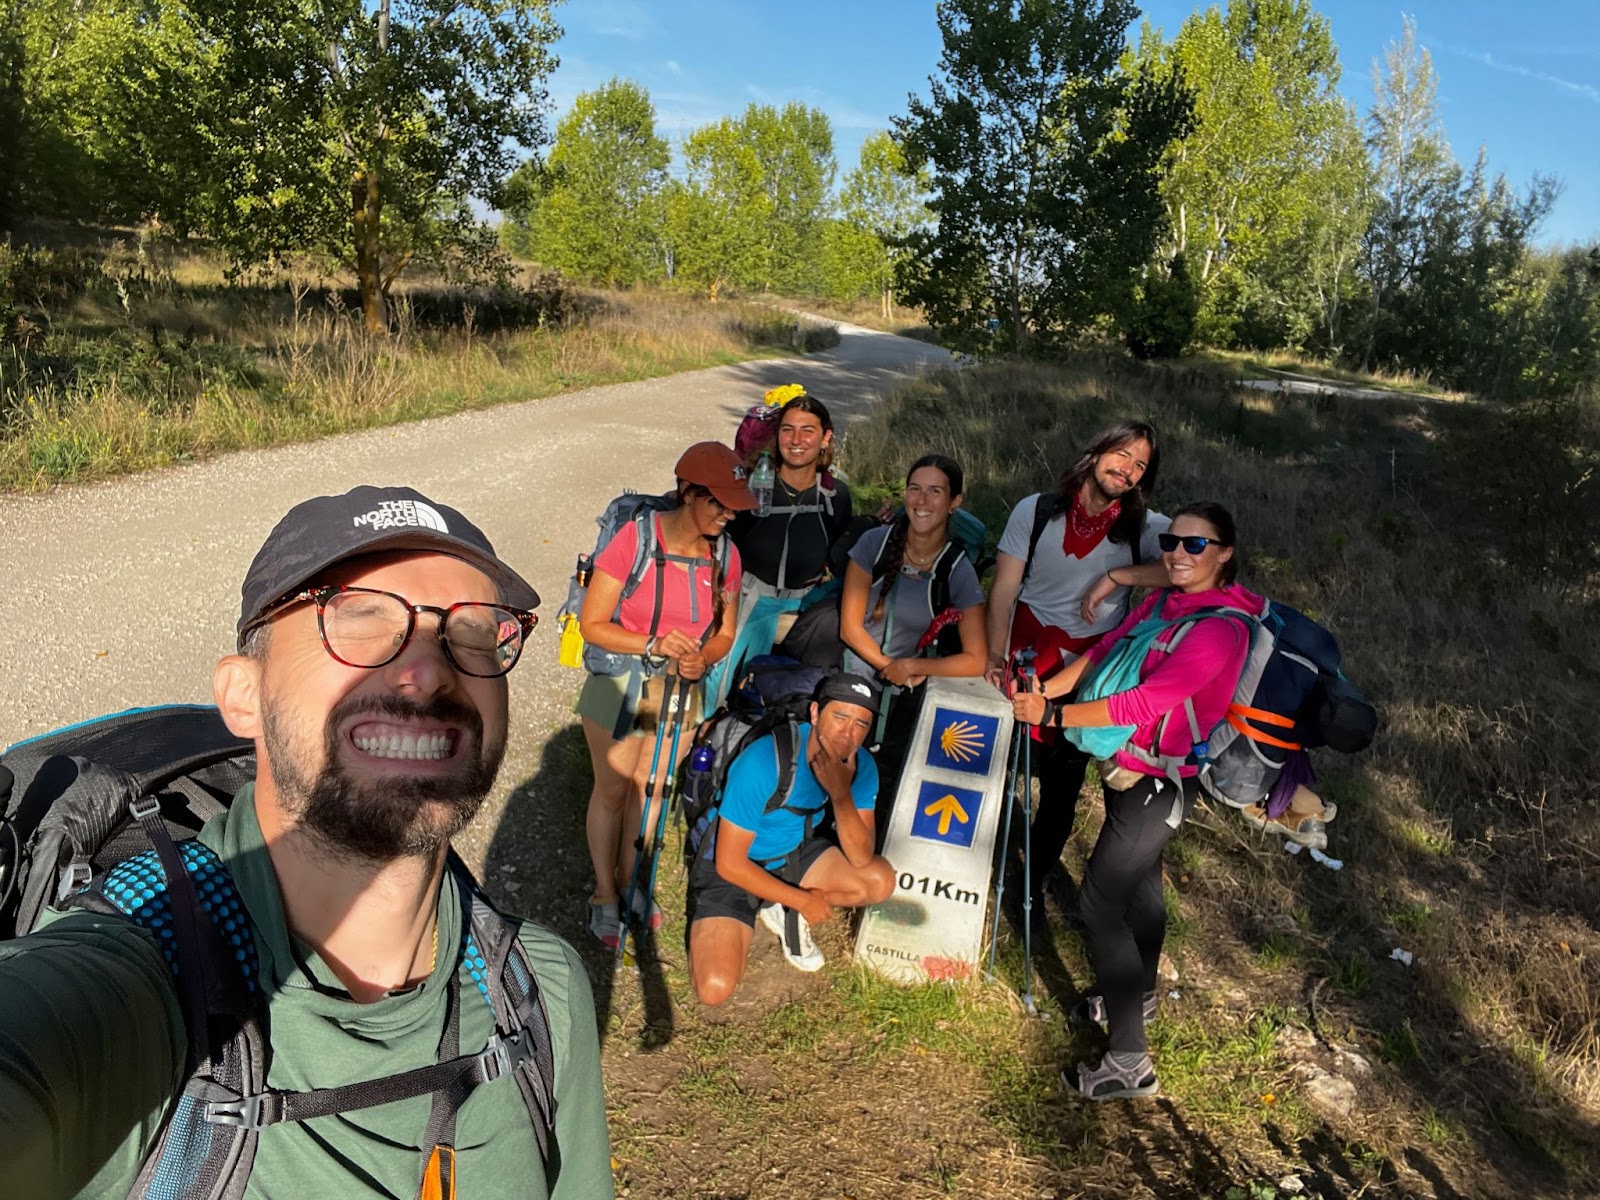 Posing at the 501km mark with my Camino family